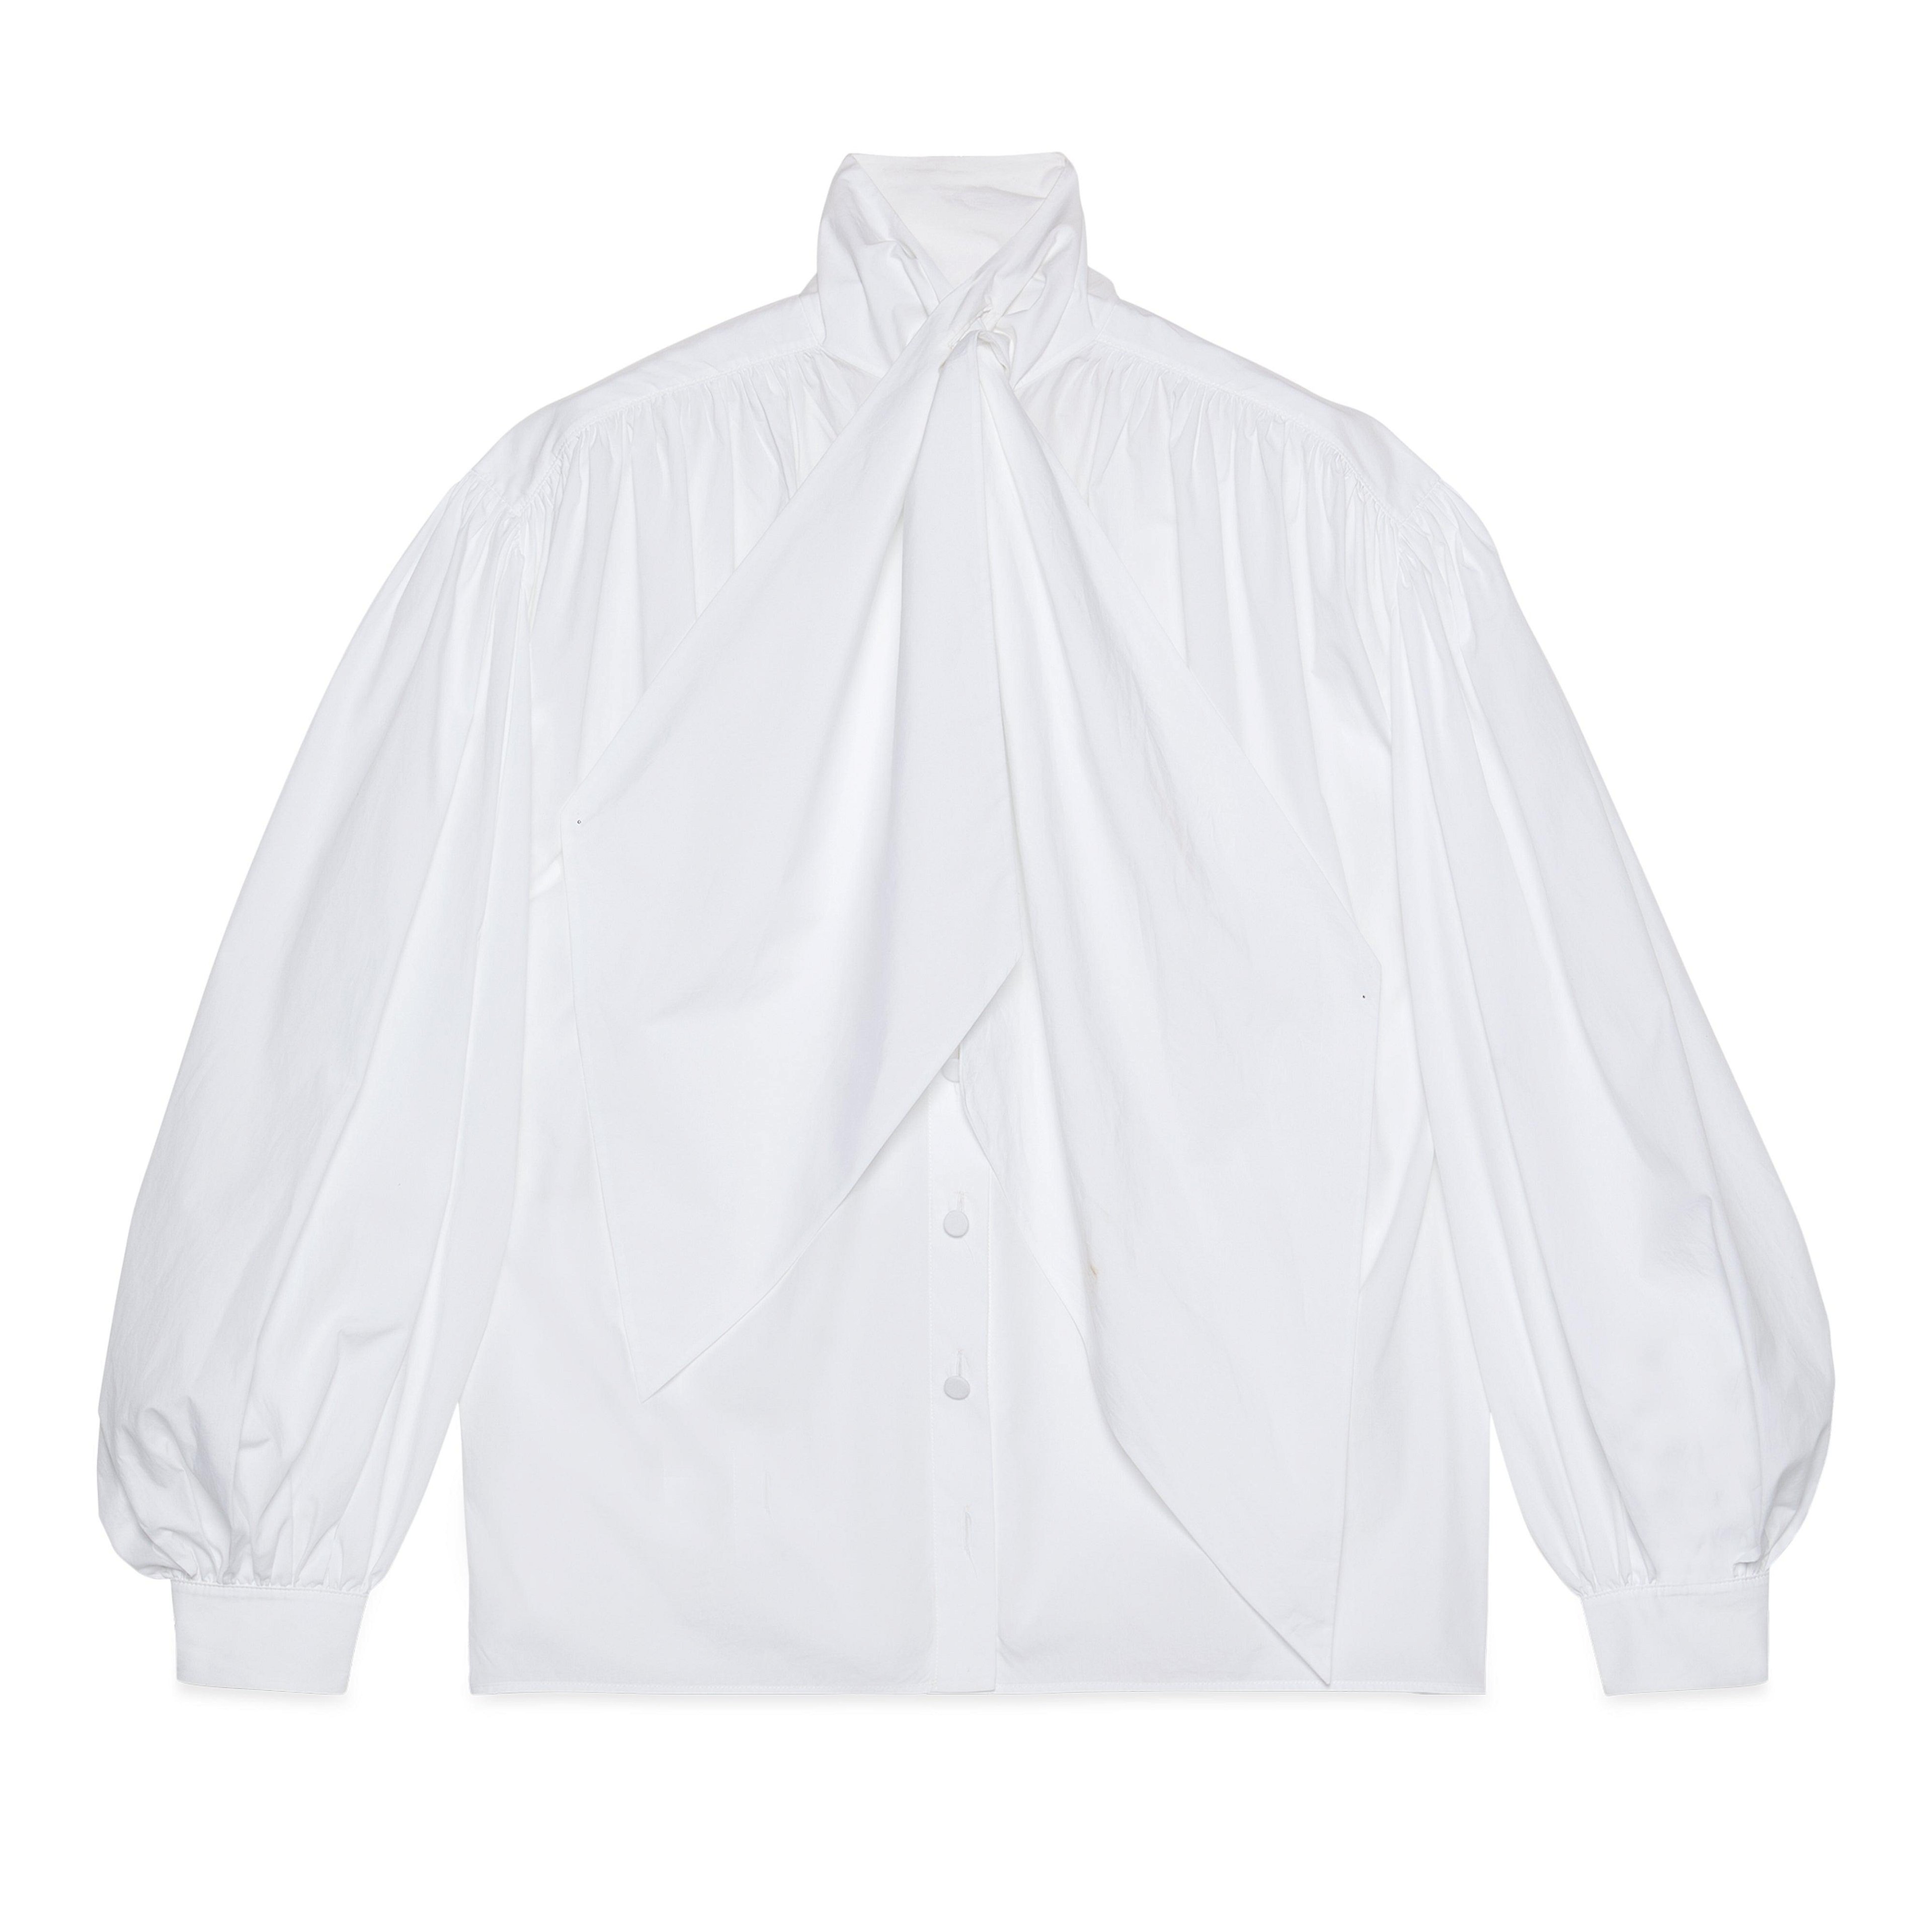 Gucci - Women’s Cotton Poplin Shirt with Tie Front - (White) by GUCCI